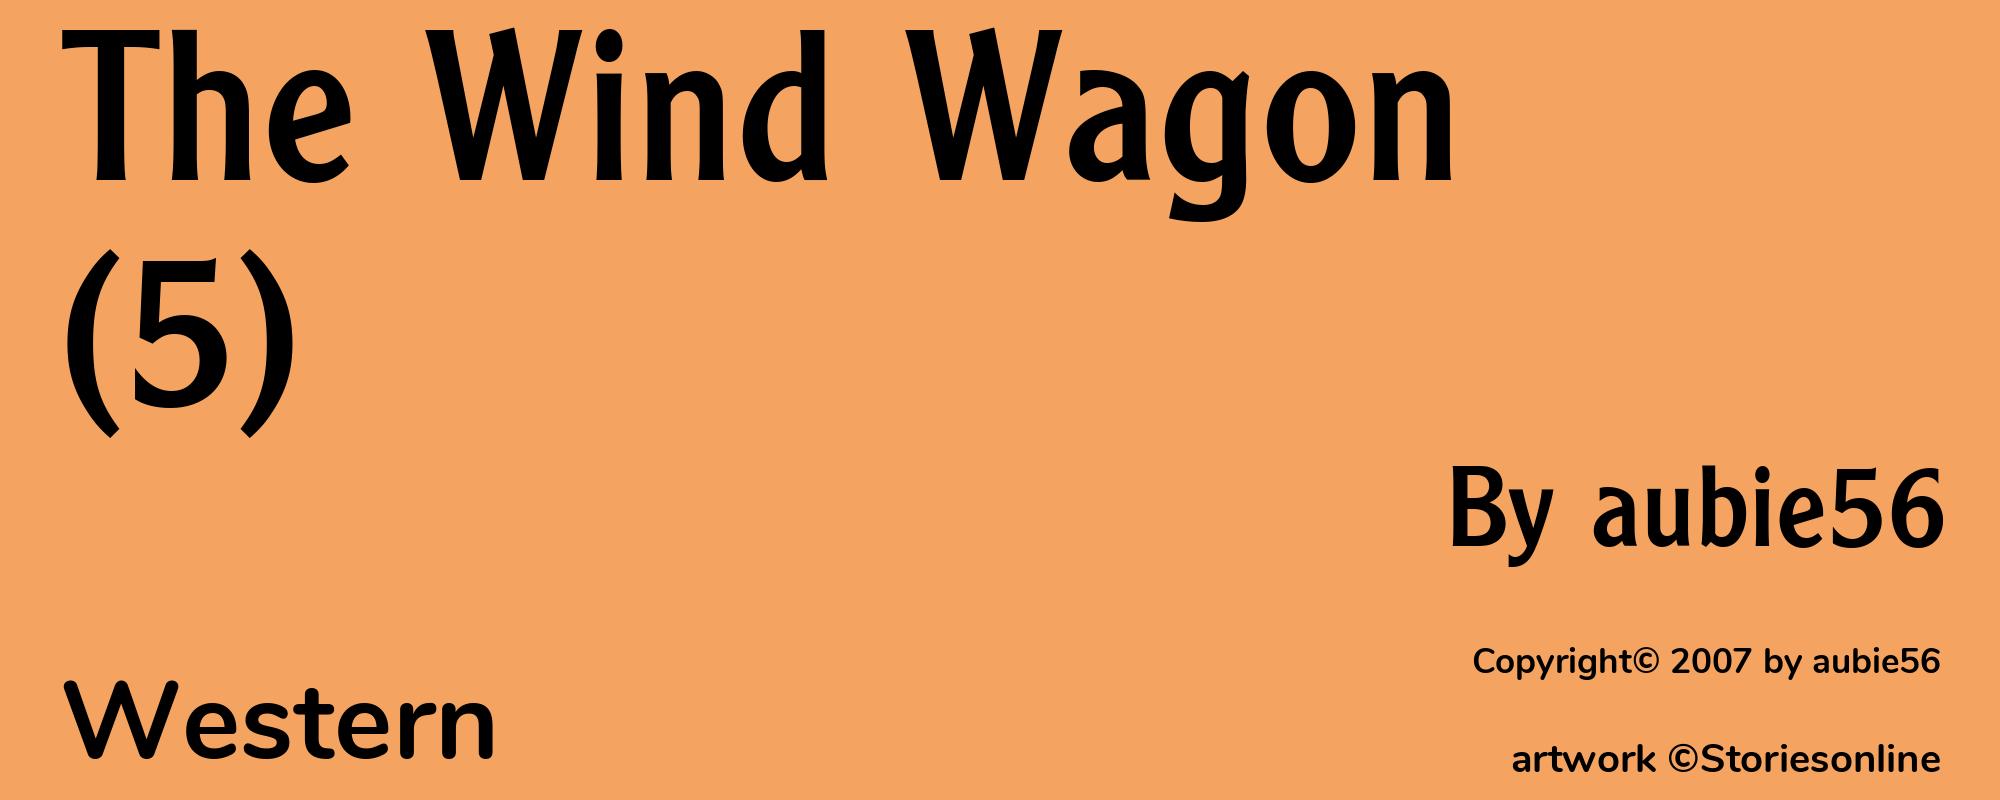 The Wind Wagon(5) - Cover